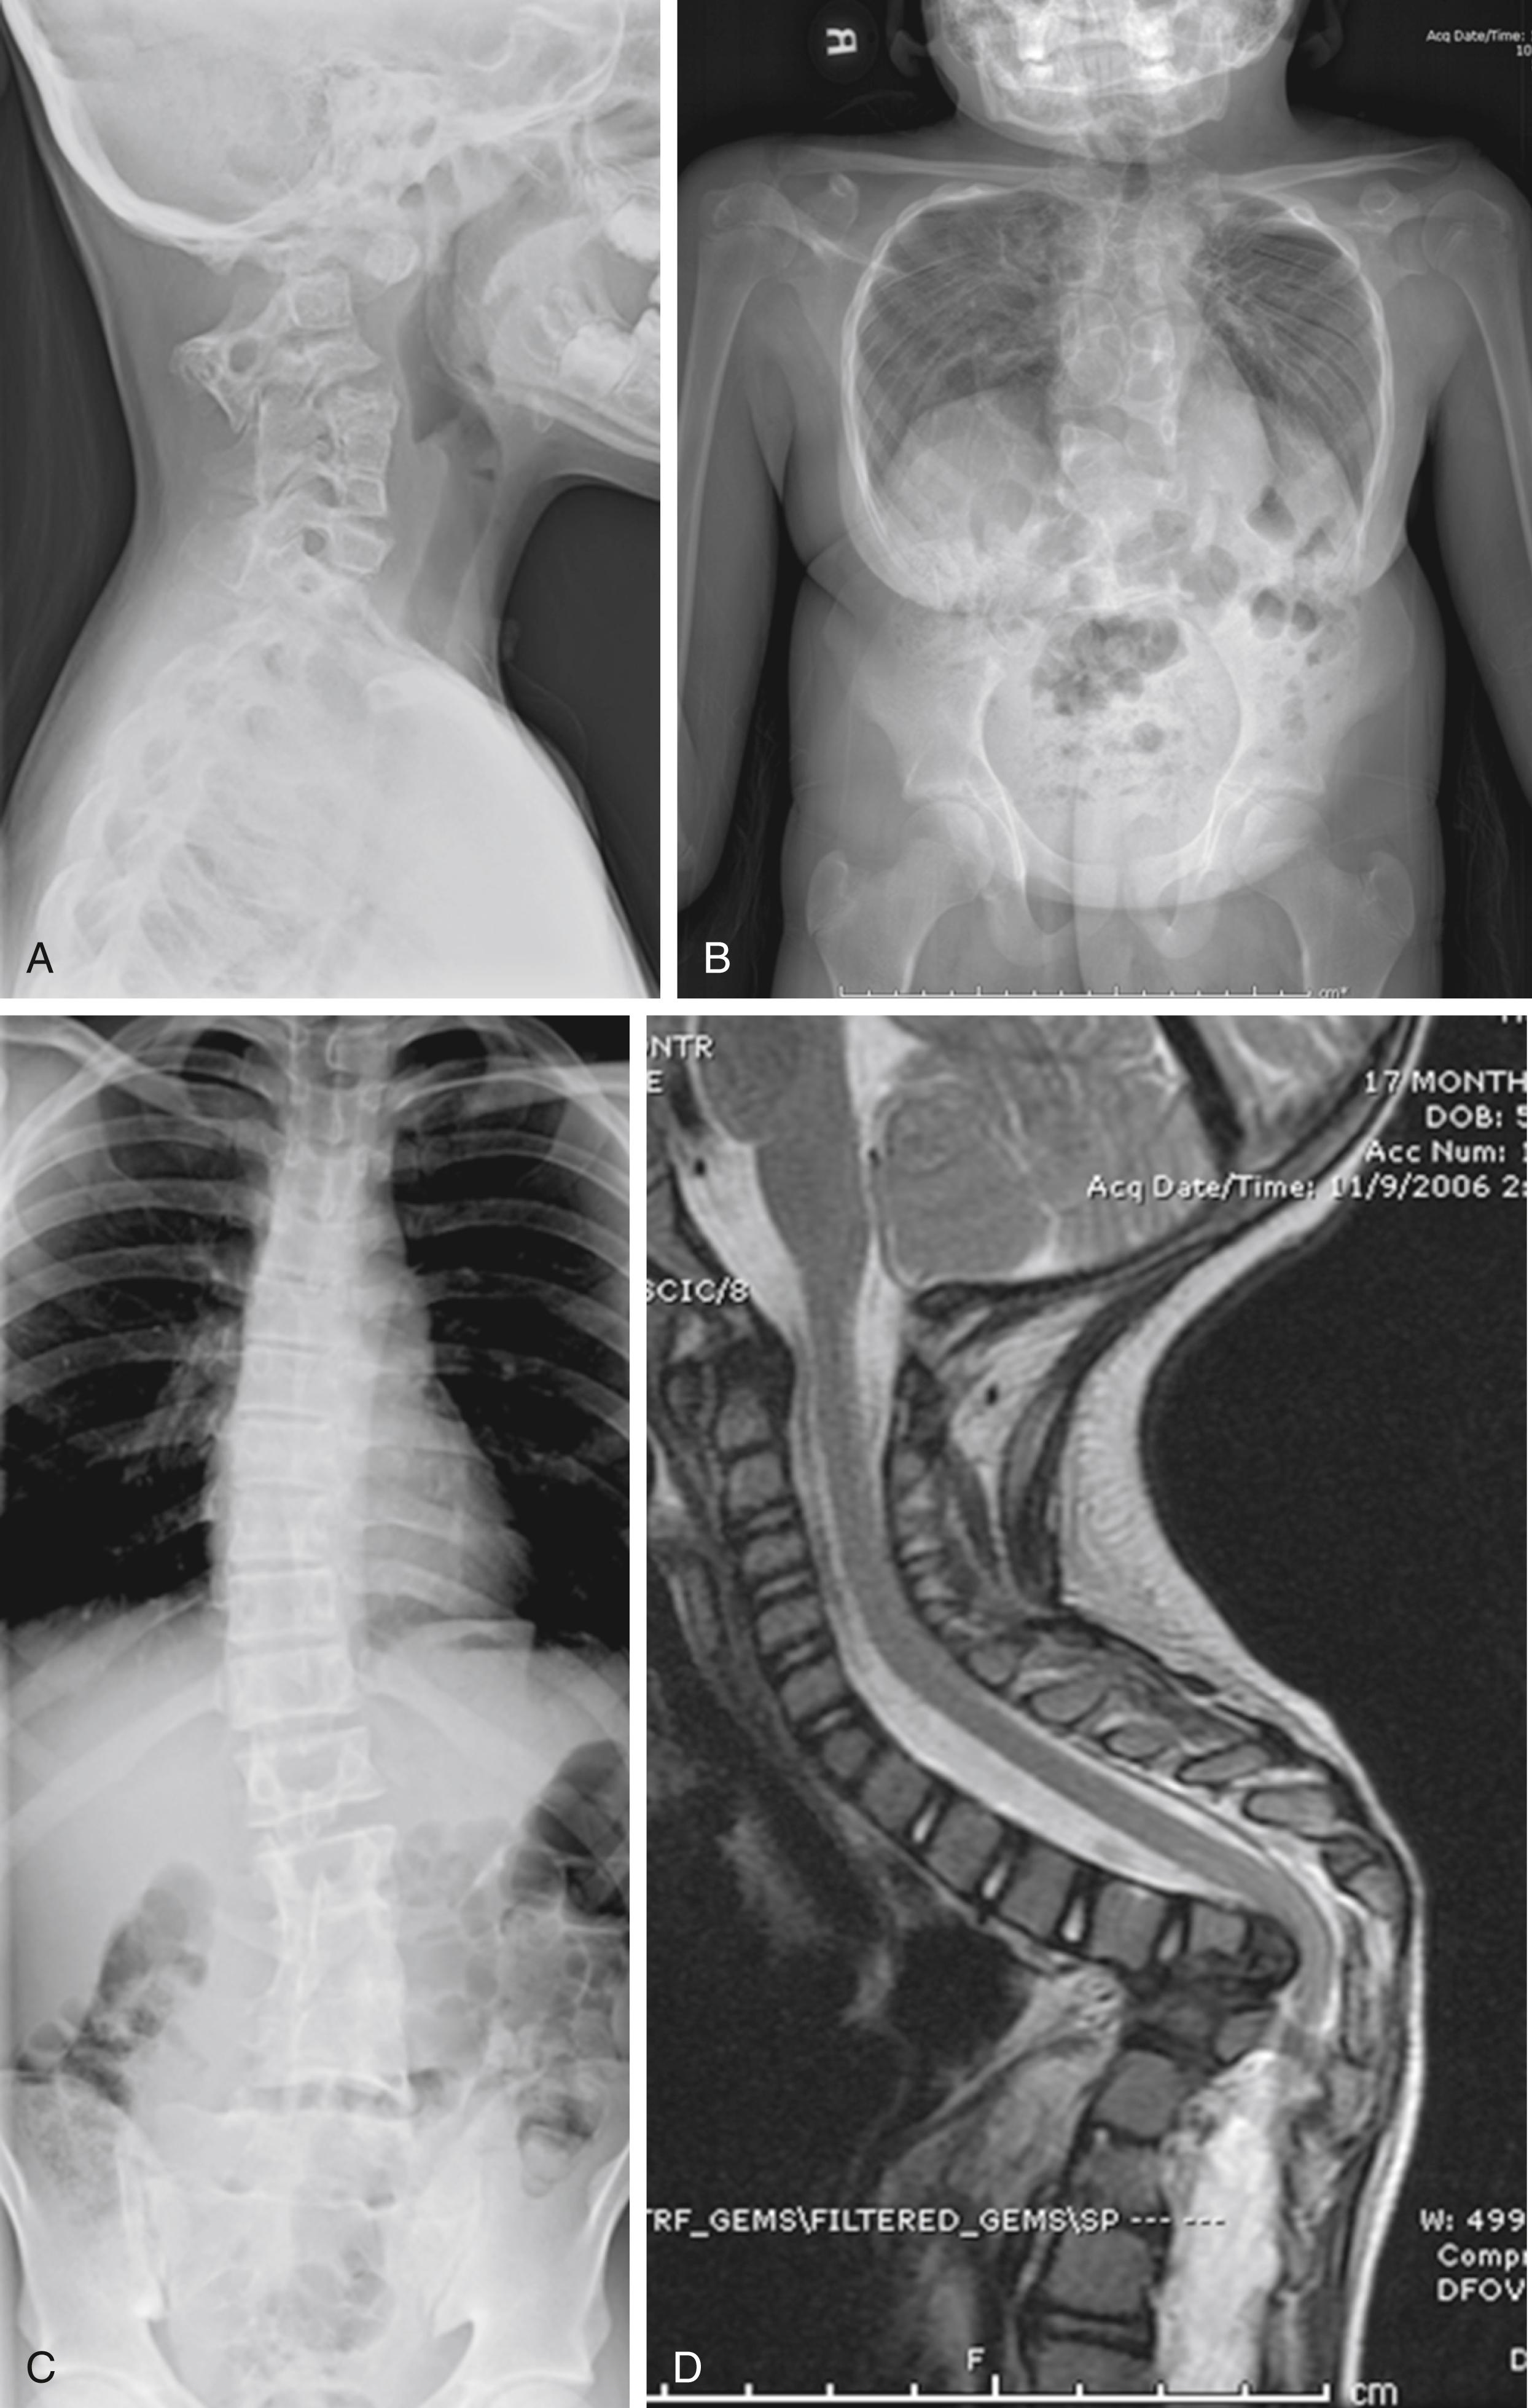 Fig. 19.1, Congenital spinal deformity encompasses a wide range of severities and locations of vertebral anomalies. A, Klippel–Feil deformity with neck pain and myelomalacia; B, Jarcho–Levin syndrome (spondylocostal dysostosis) with no respiratory symptoms in spite of severe shortening of the torso; C, lumbar block vertebra with activity-related pain at the junction with normally segmented spine; D, segmental spinal dysgenesis with progressive paraparesis.